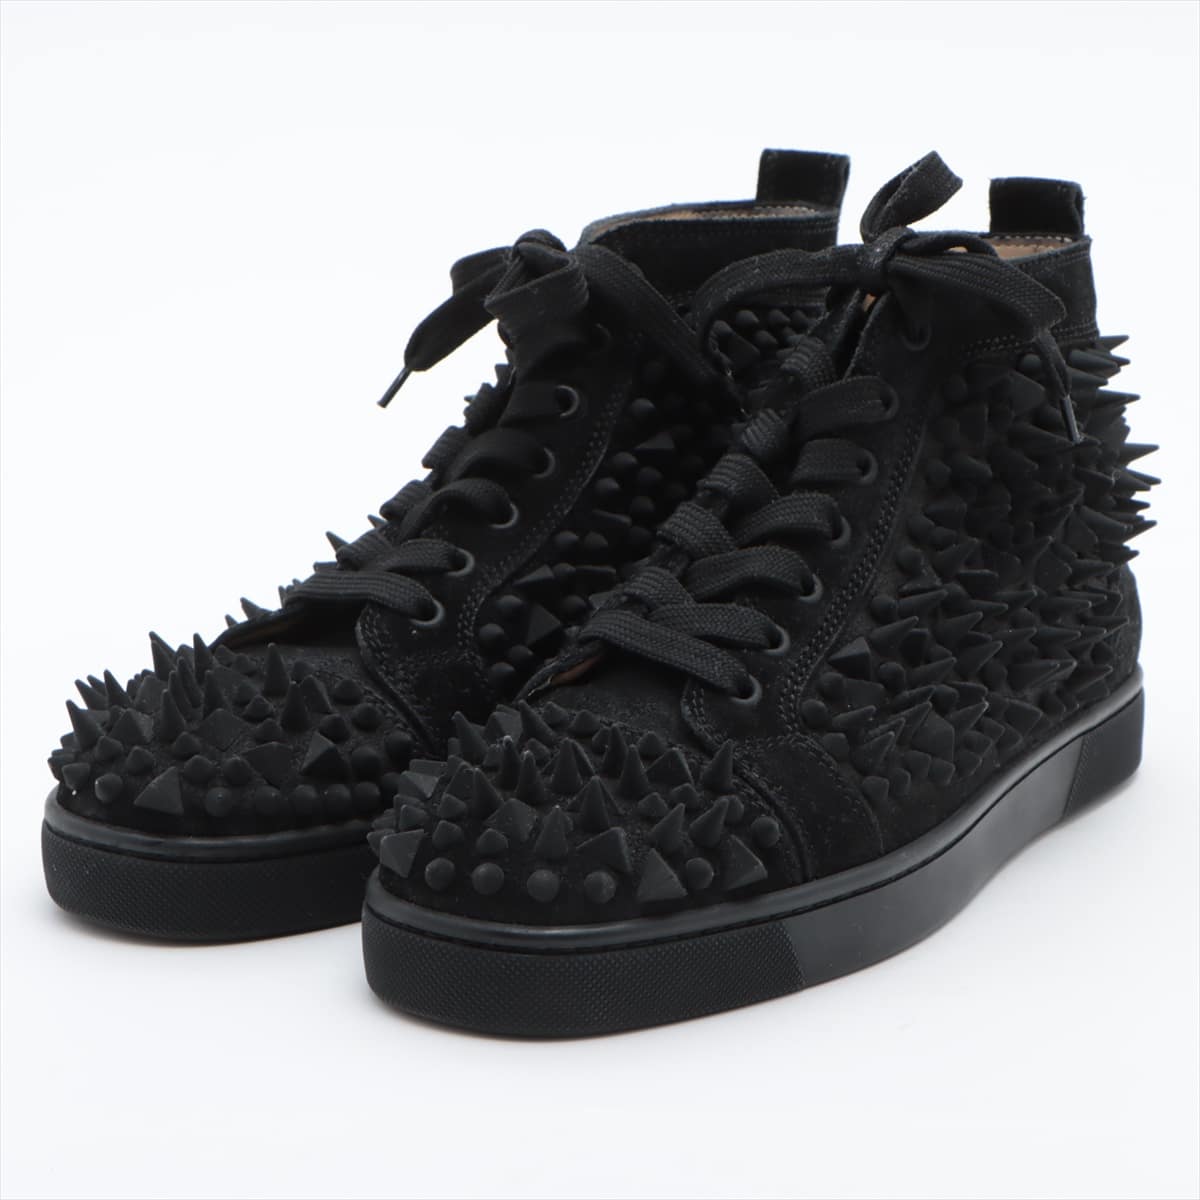 Christian Louboutin Lewis Spike Suede High-top Sneakers 40 Unisex Black